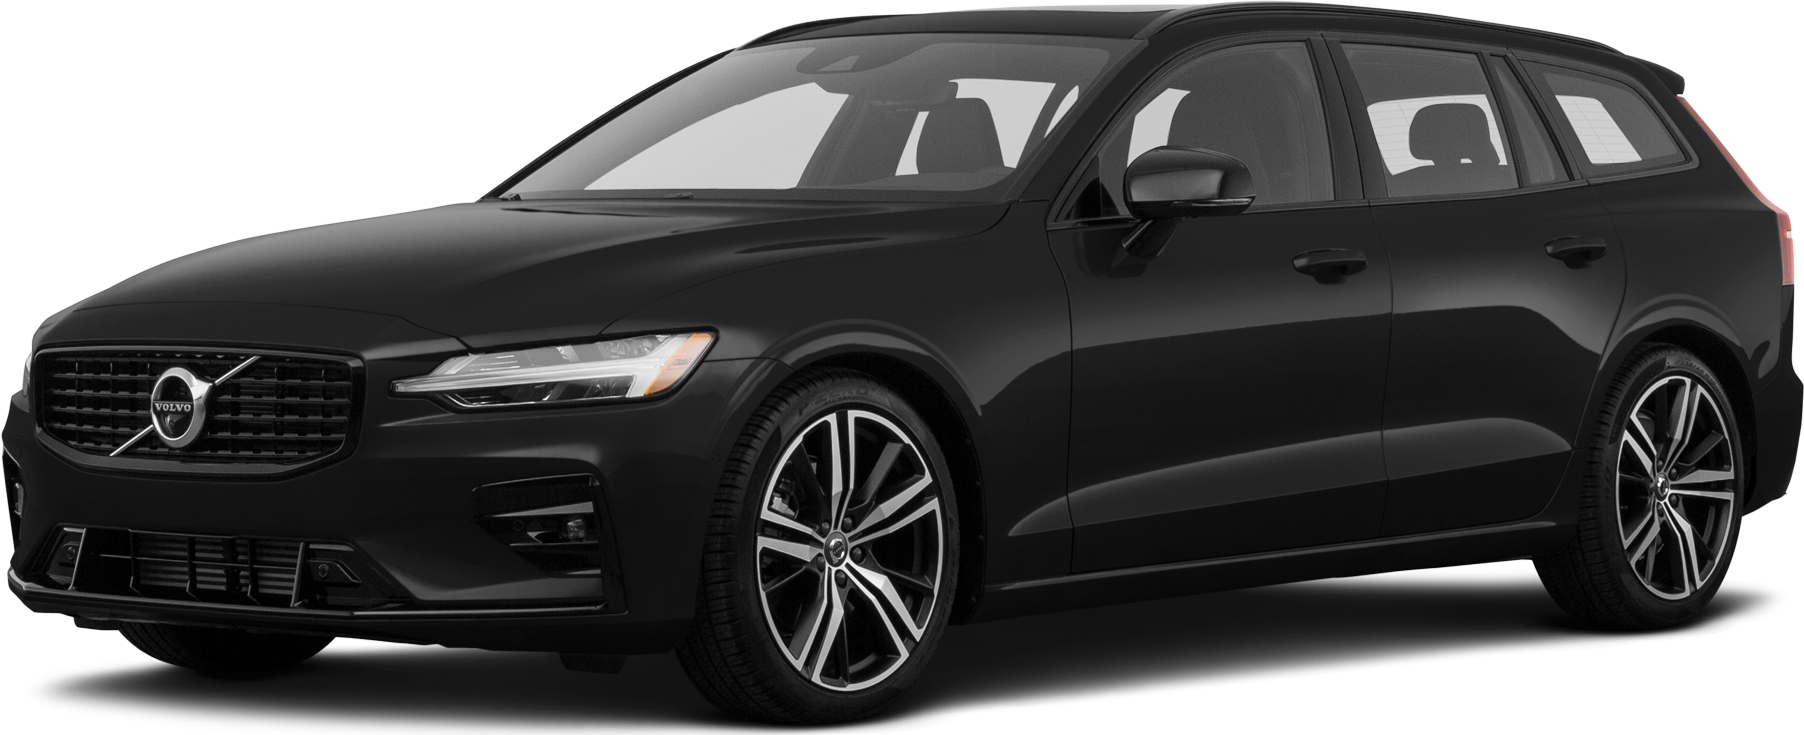 2021 Volvo V60 Specs and Features